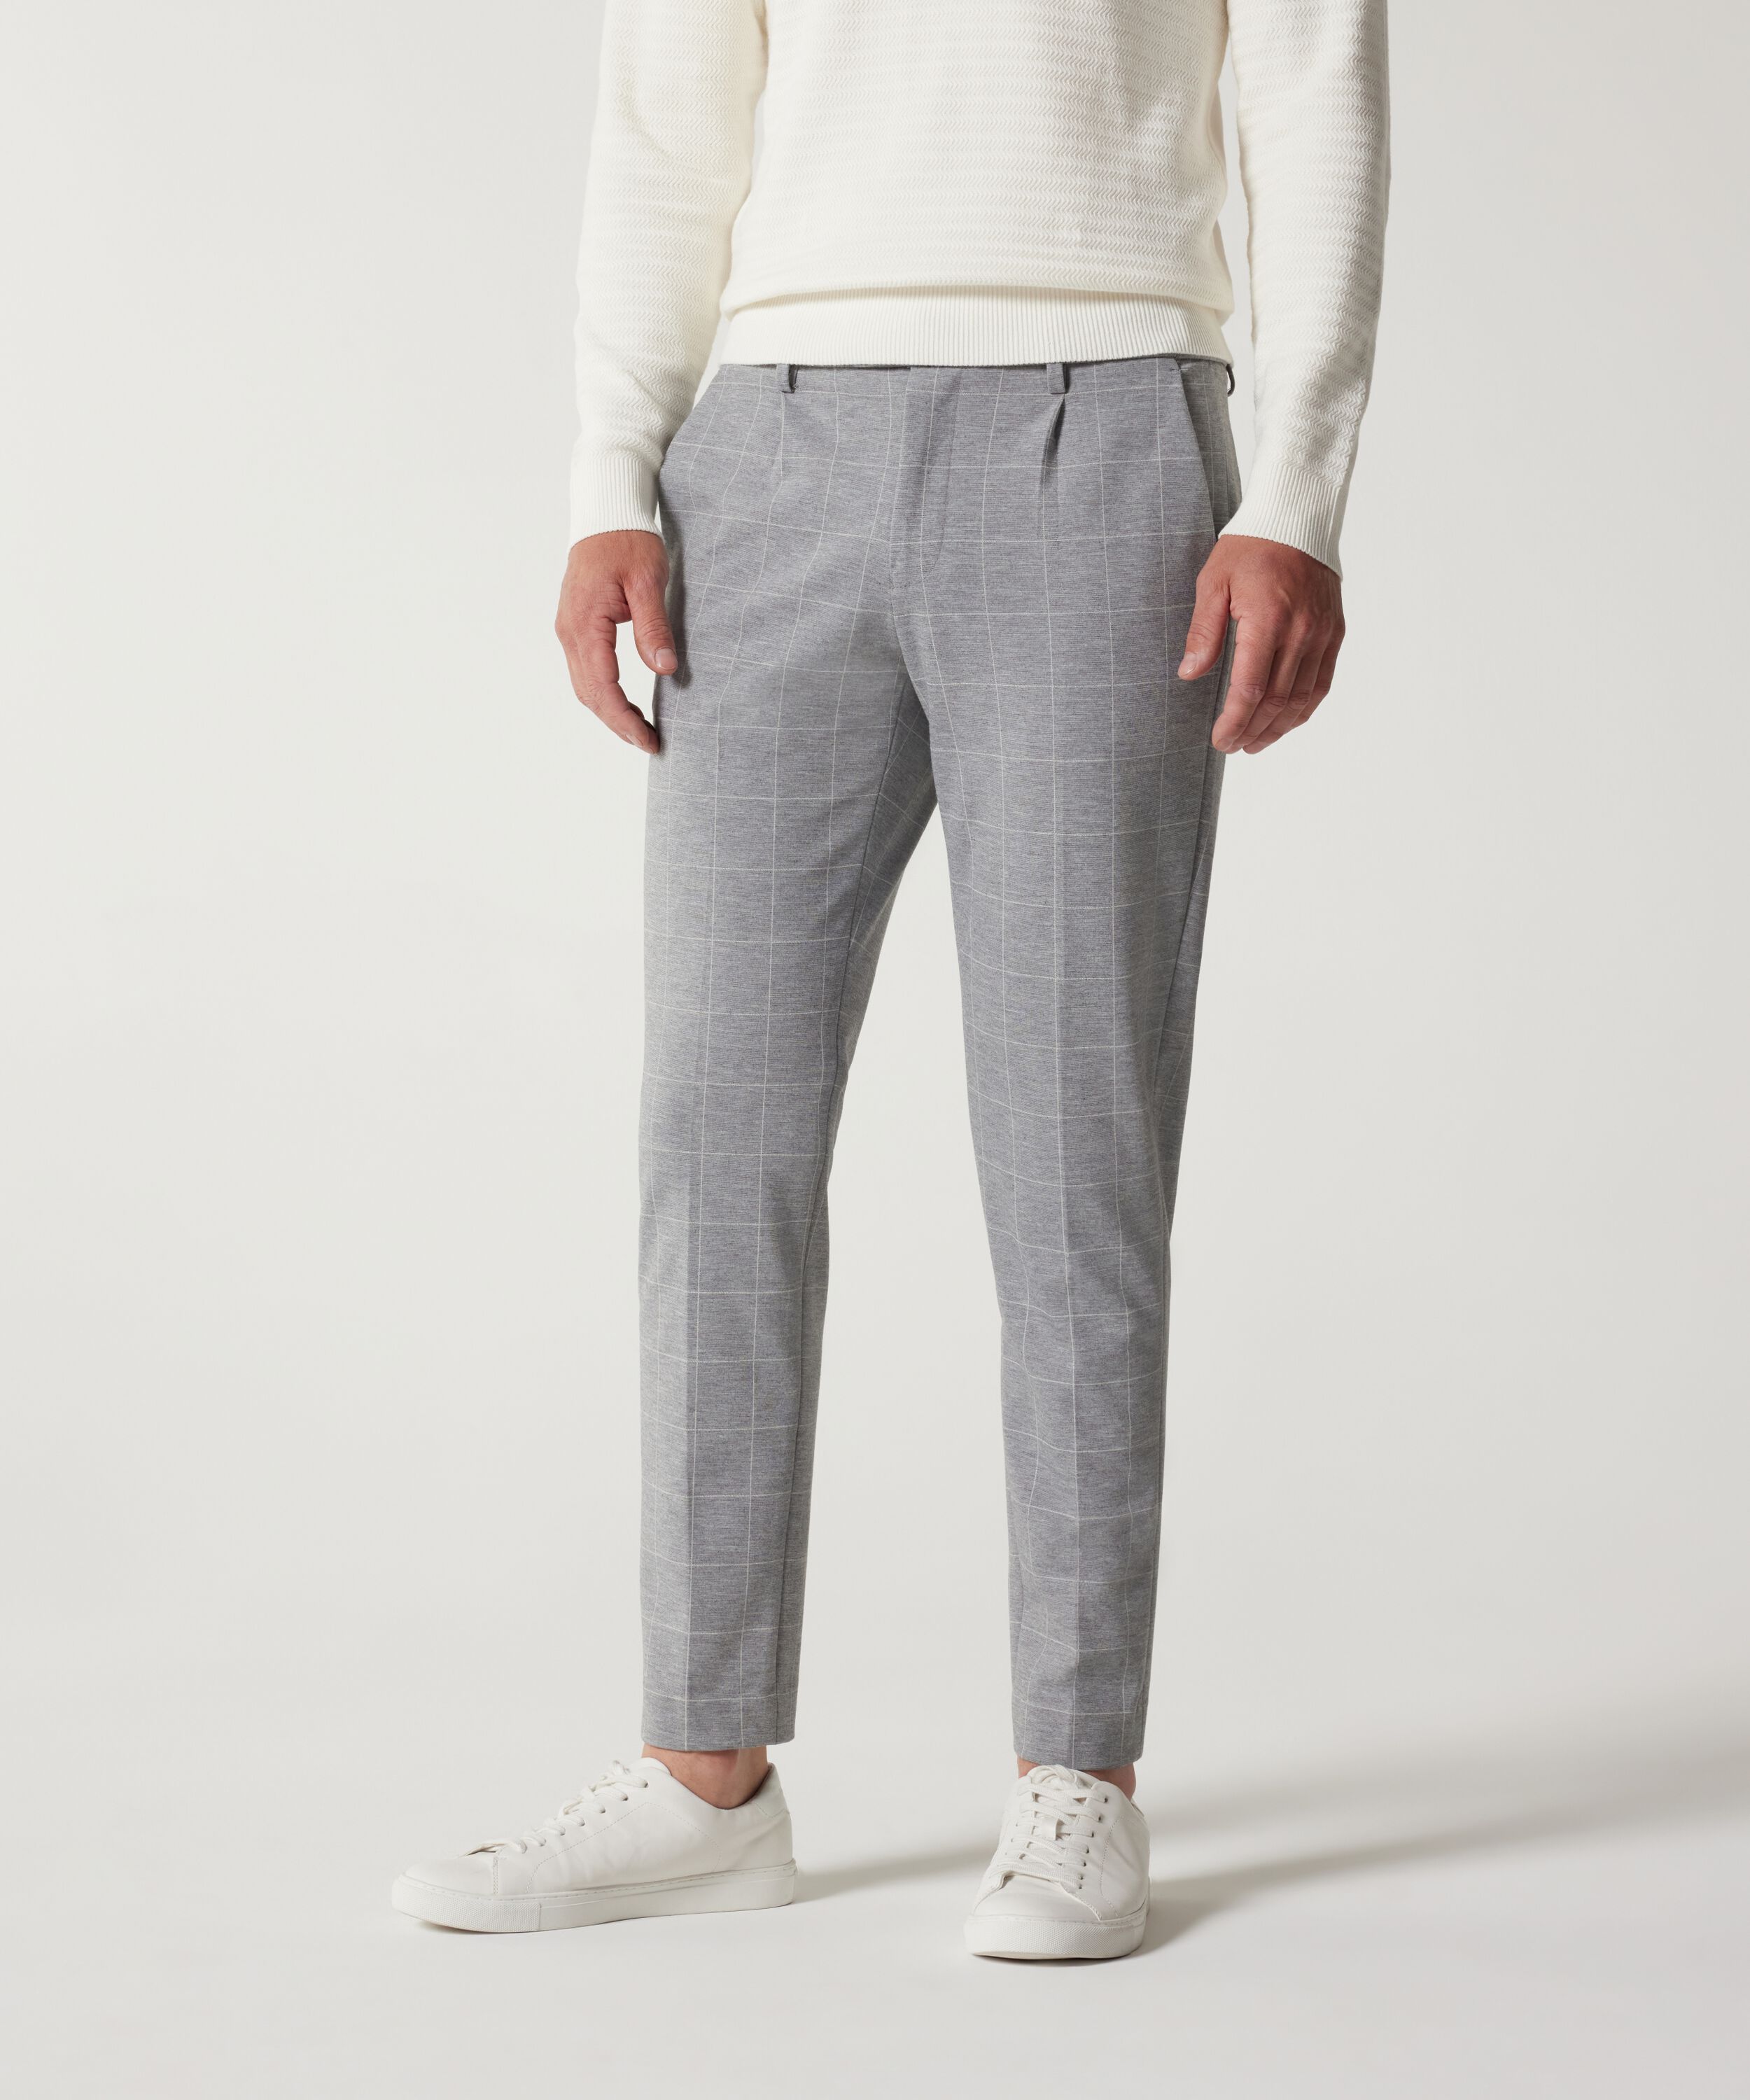 Relaxed Slim Jersey Check Tailored Pant - Grey Windowpane